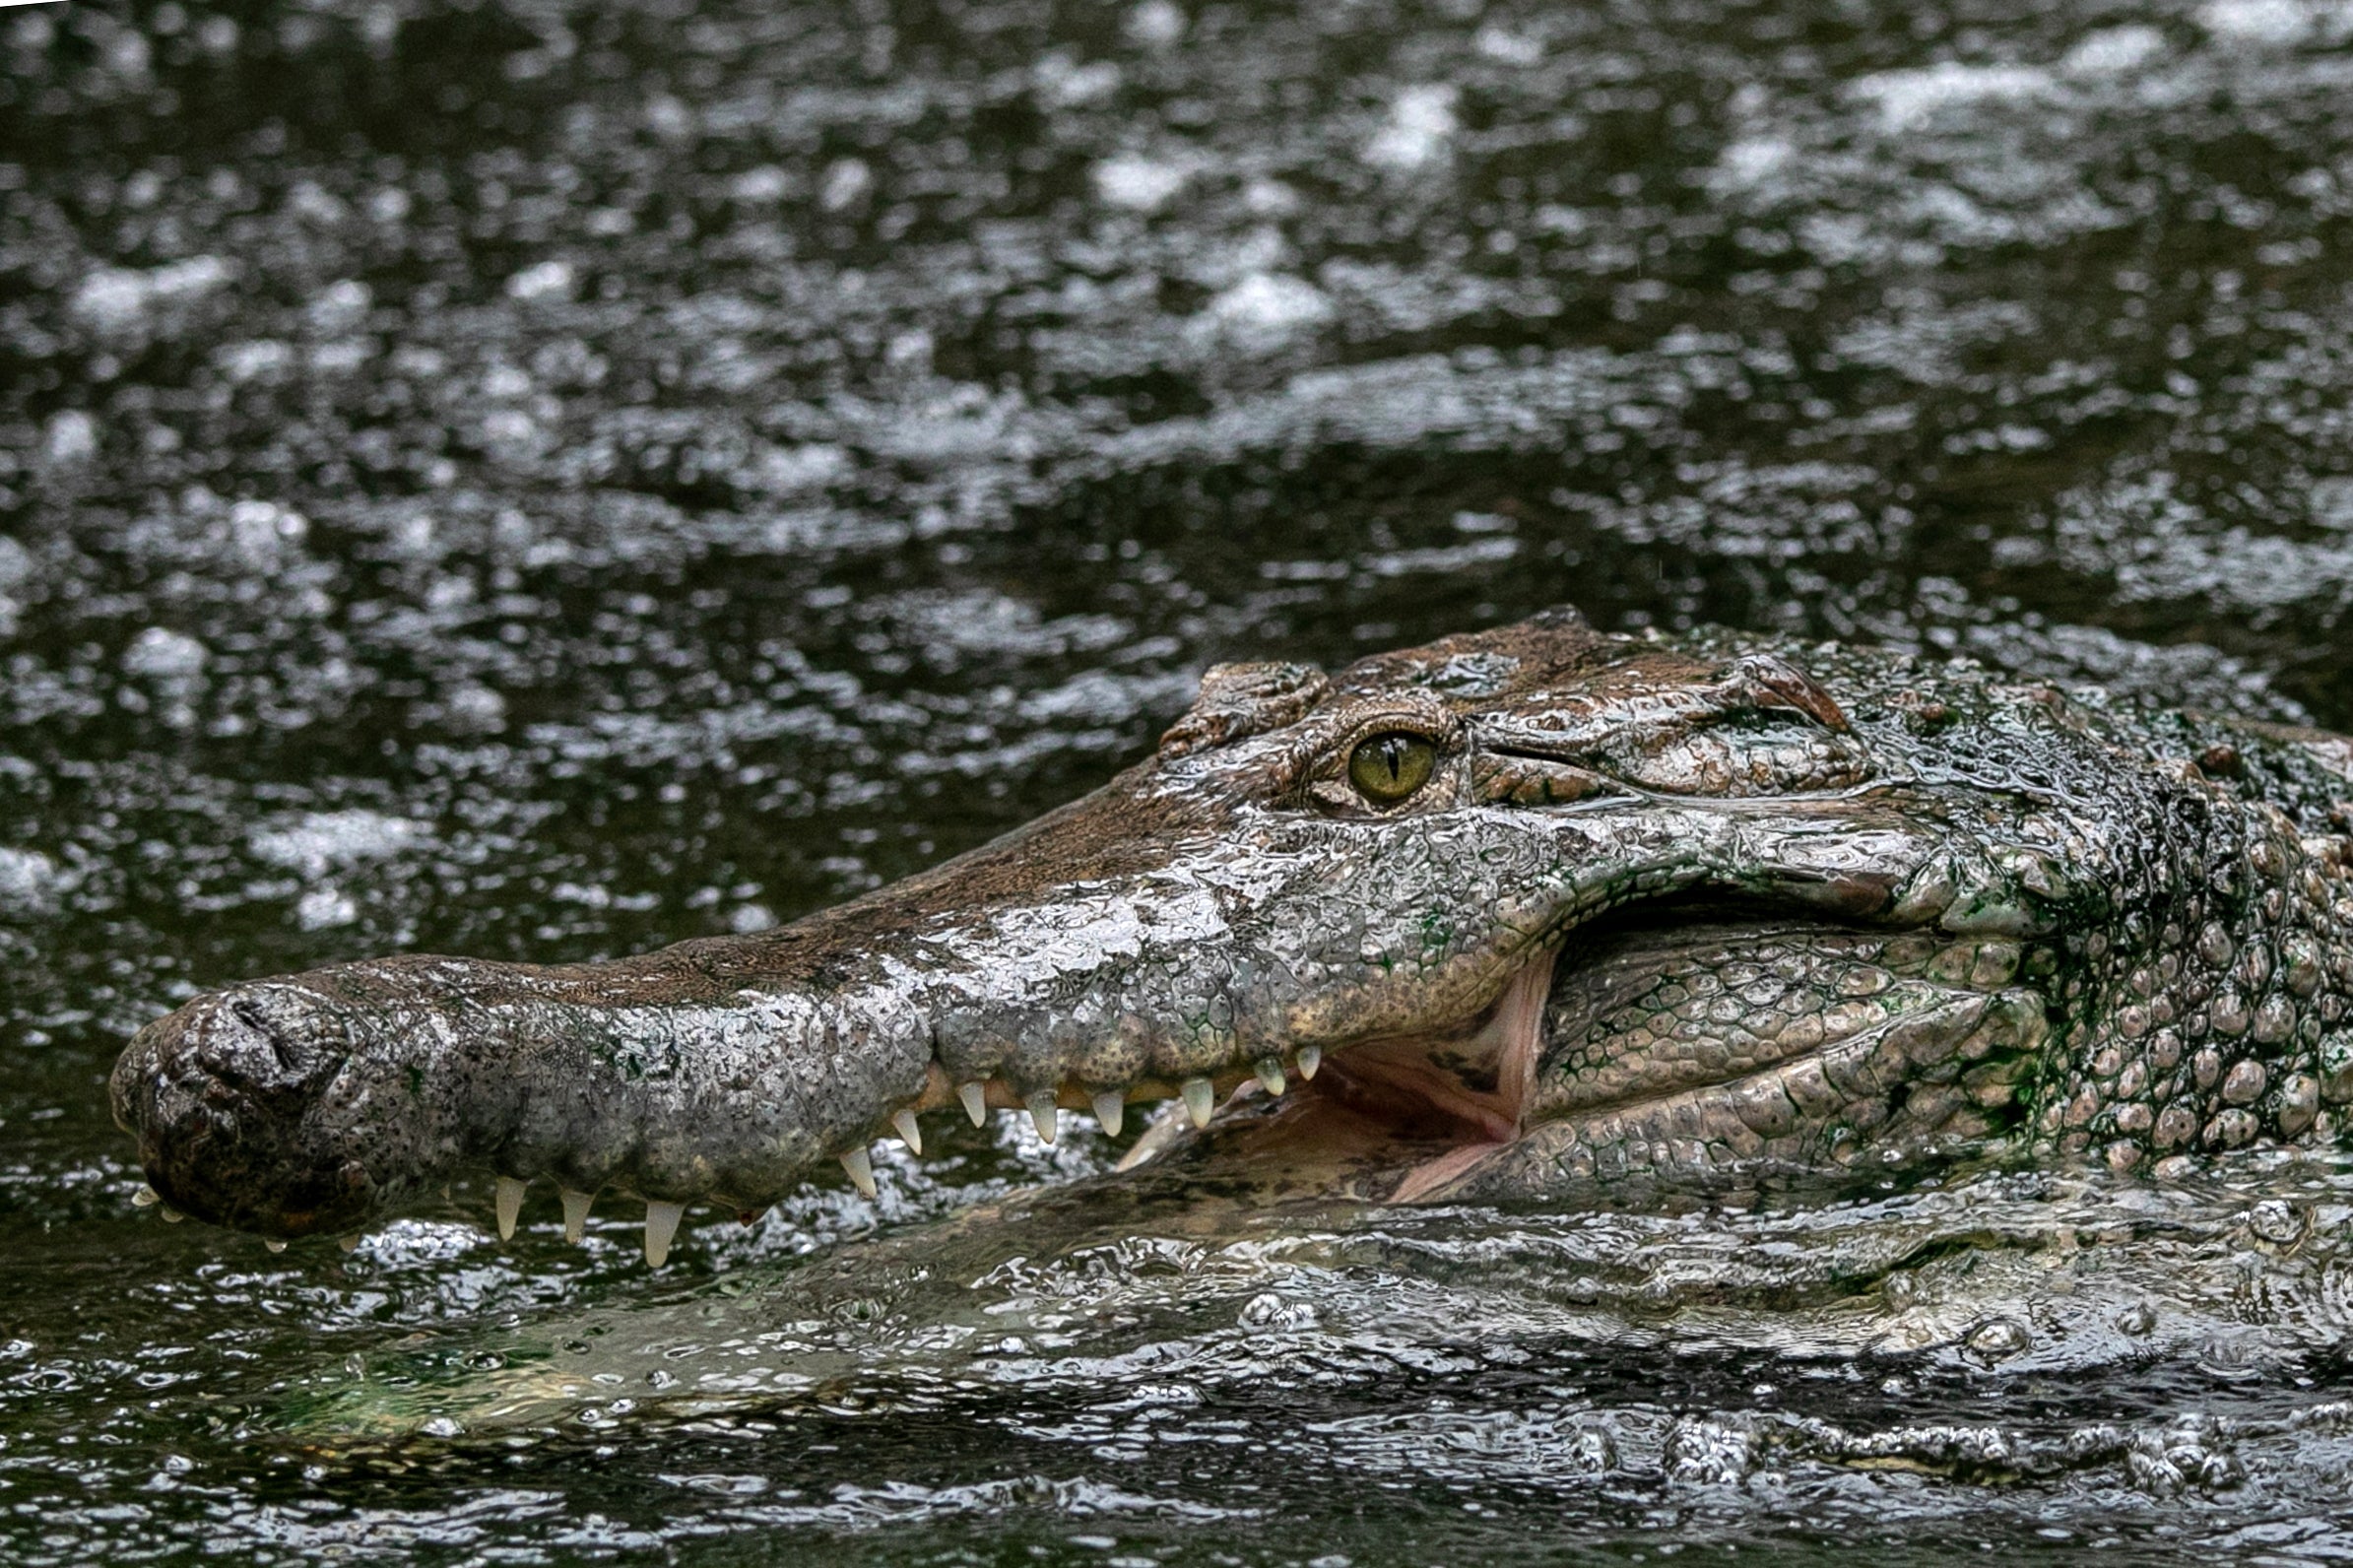 The NHS treated 10 people for injuries caused by crocodiles or alligators in one year